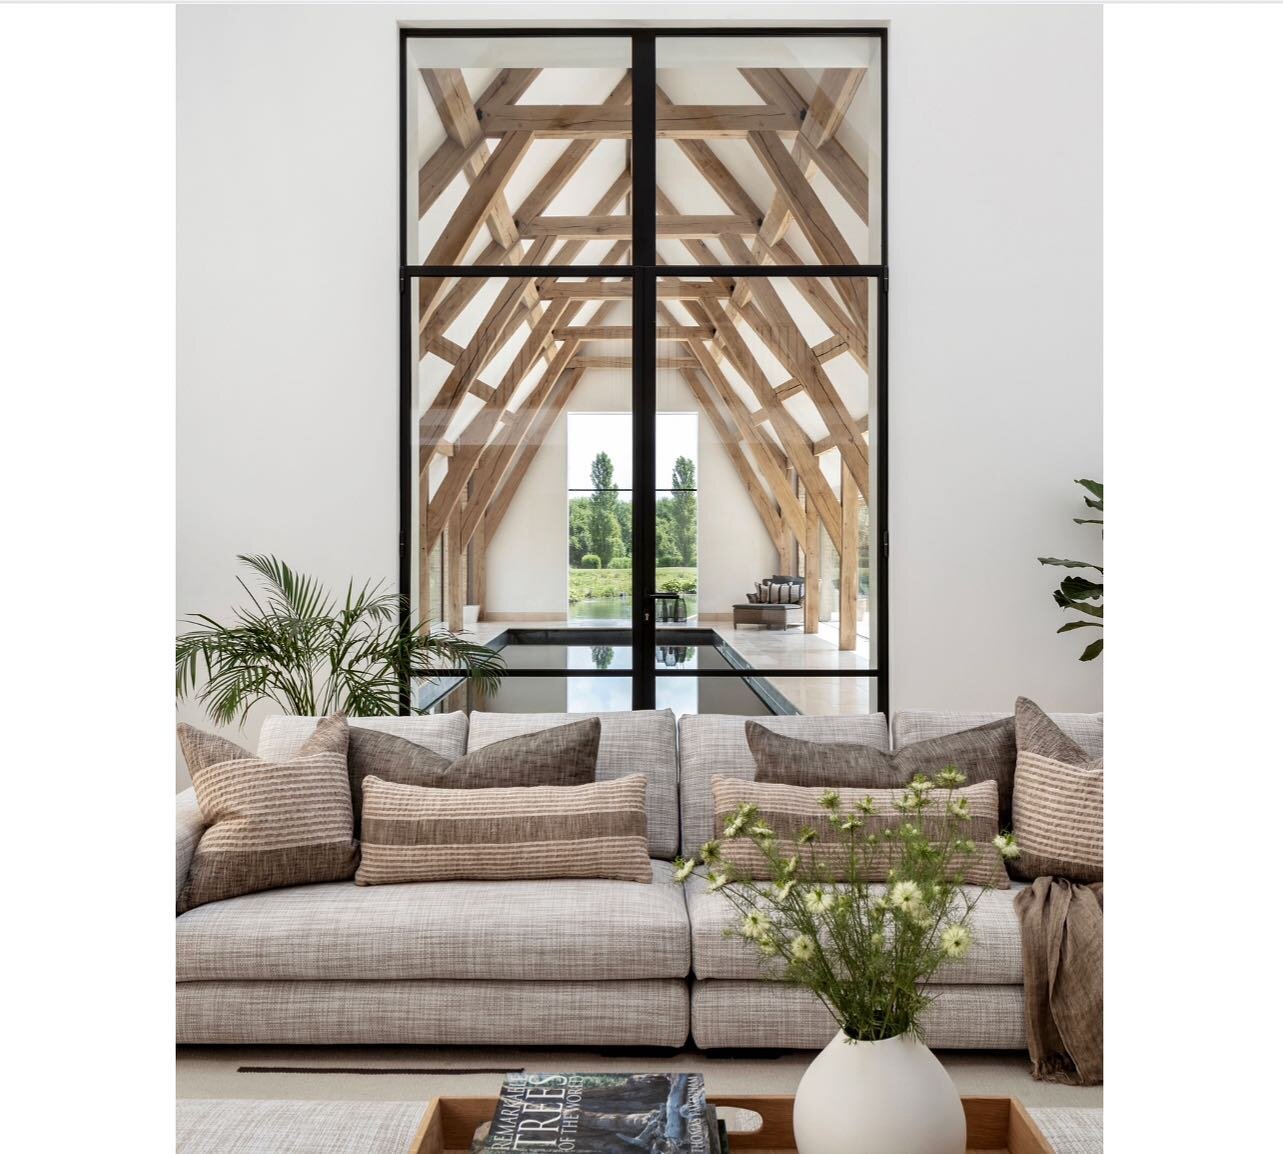 Refined simplicity &hellip; Warm tones, natural materials and beautiful light reflections &hellip; country house design from @louiseholtdesign #interiordesign #countryliving #interiorarchitecture #louiseholtdesign #archidaily #countryhouse #warmminim